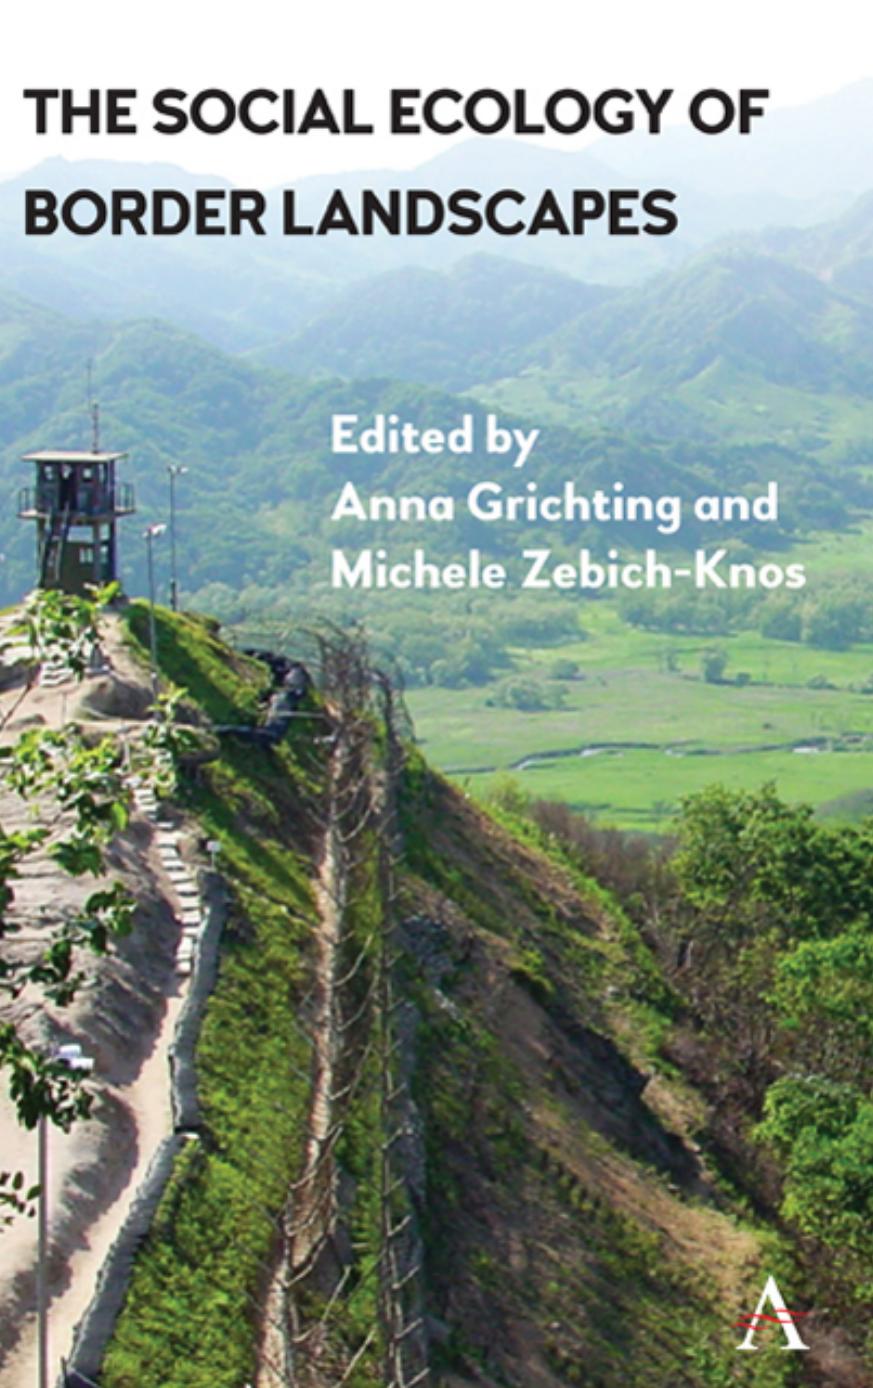 (eBook PDF)The Social Ecology of Border Landscapes by Anna Grichting,Michele Zebich-Knos